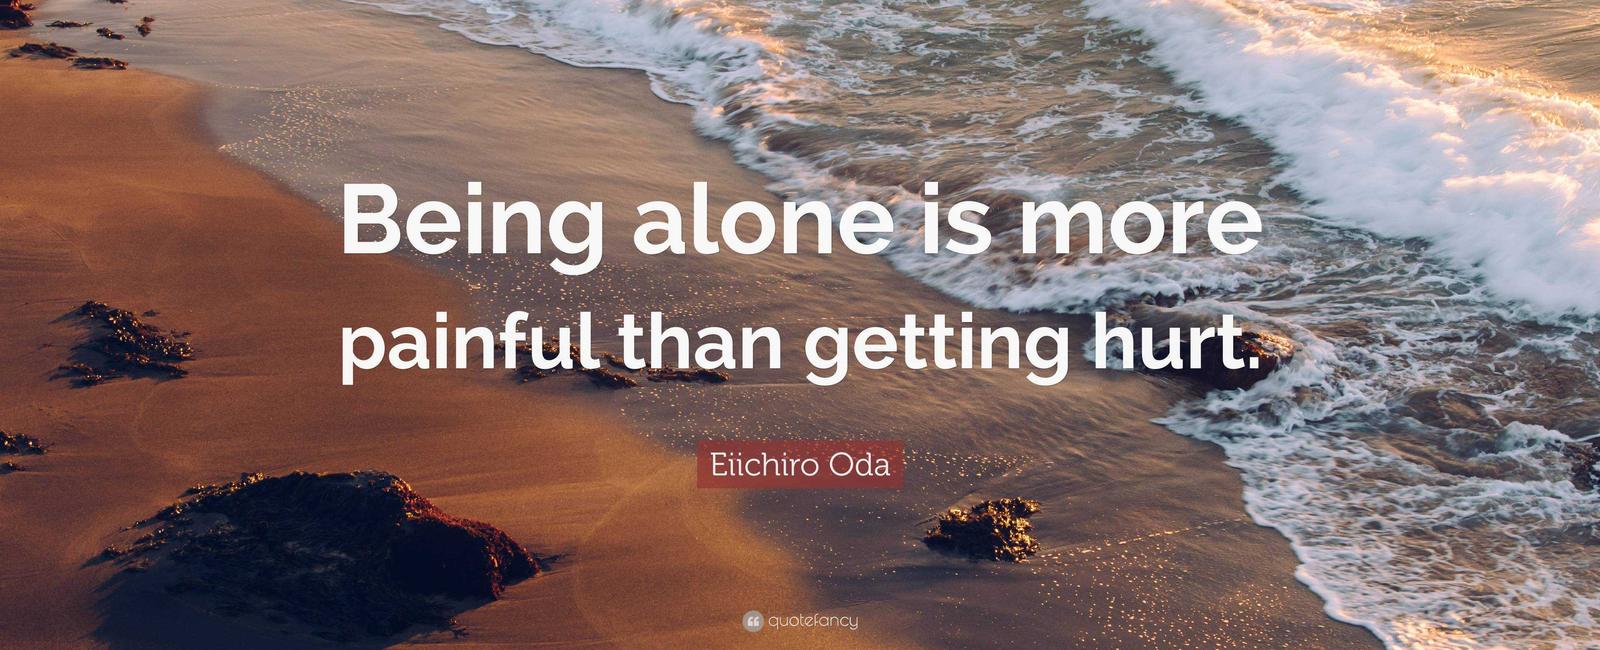 Being lonely is bad for our health